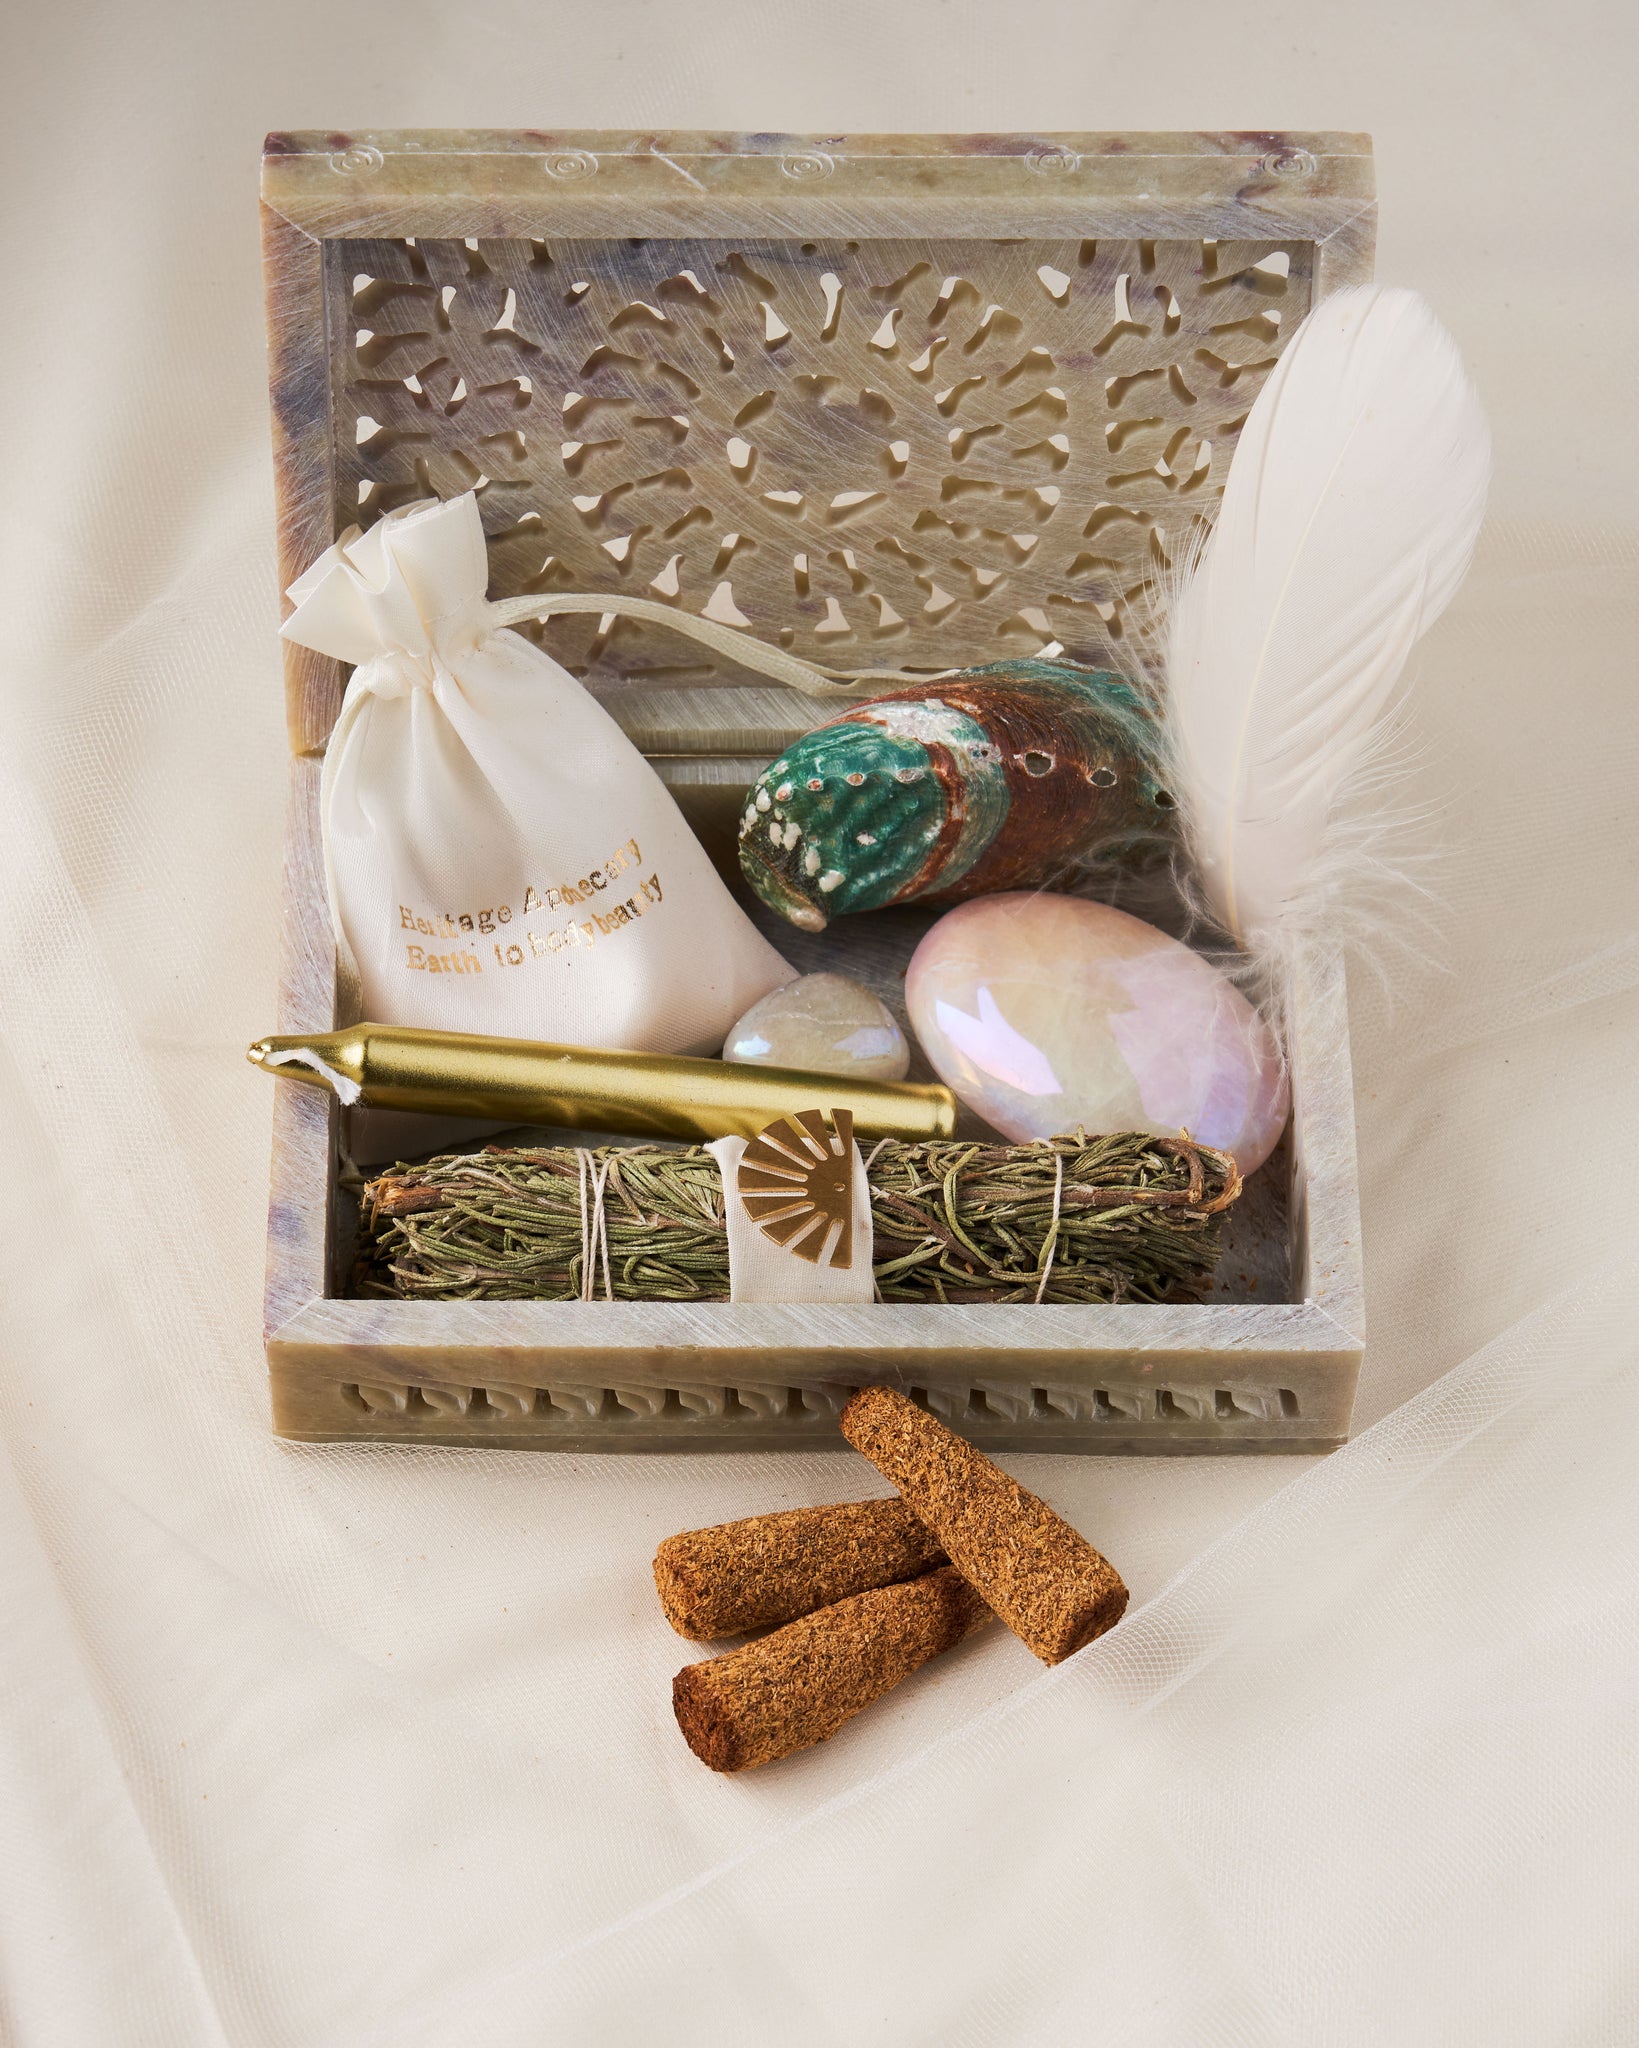 Discover Spiritual Alignment and Manifestation - The Surrender Kit by Heritage Apothecary + Victory Jones. Rosemary Wand, Palo Santo Cones, Crystals, and Guided Meditation in a Beautiful Hand Carved Box!